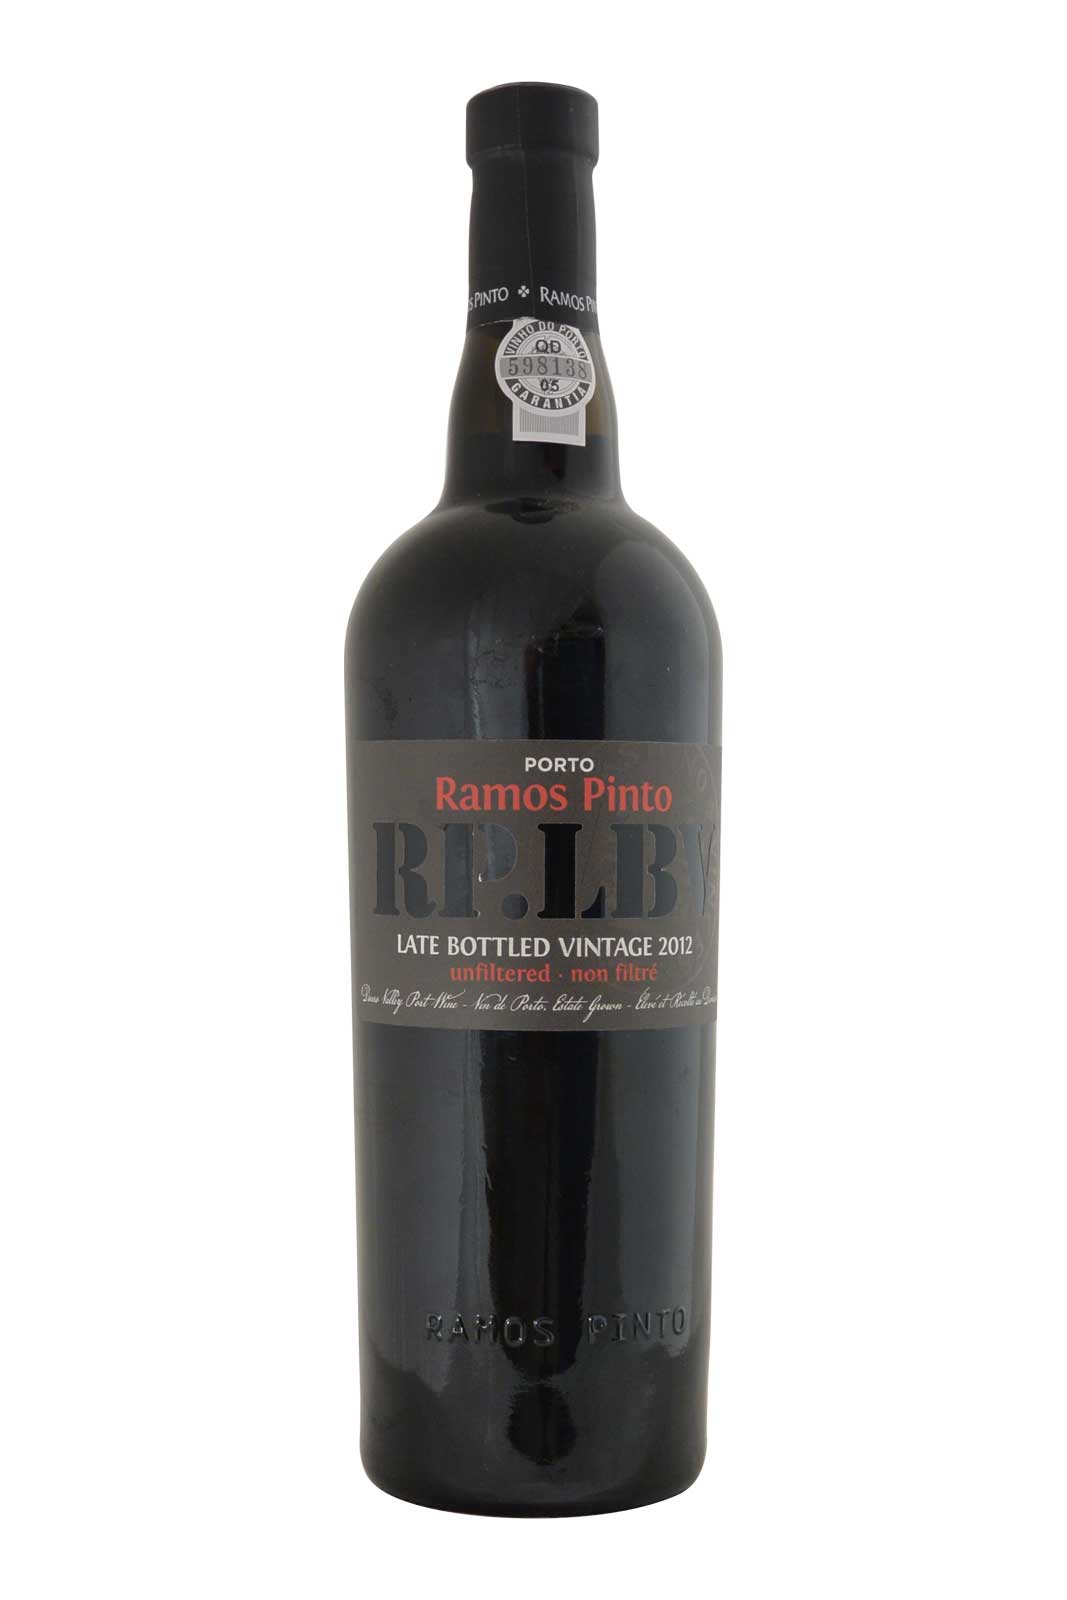 Ramos Pinto Late Bottled Vintage 2012